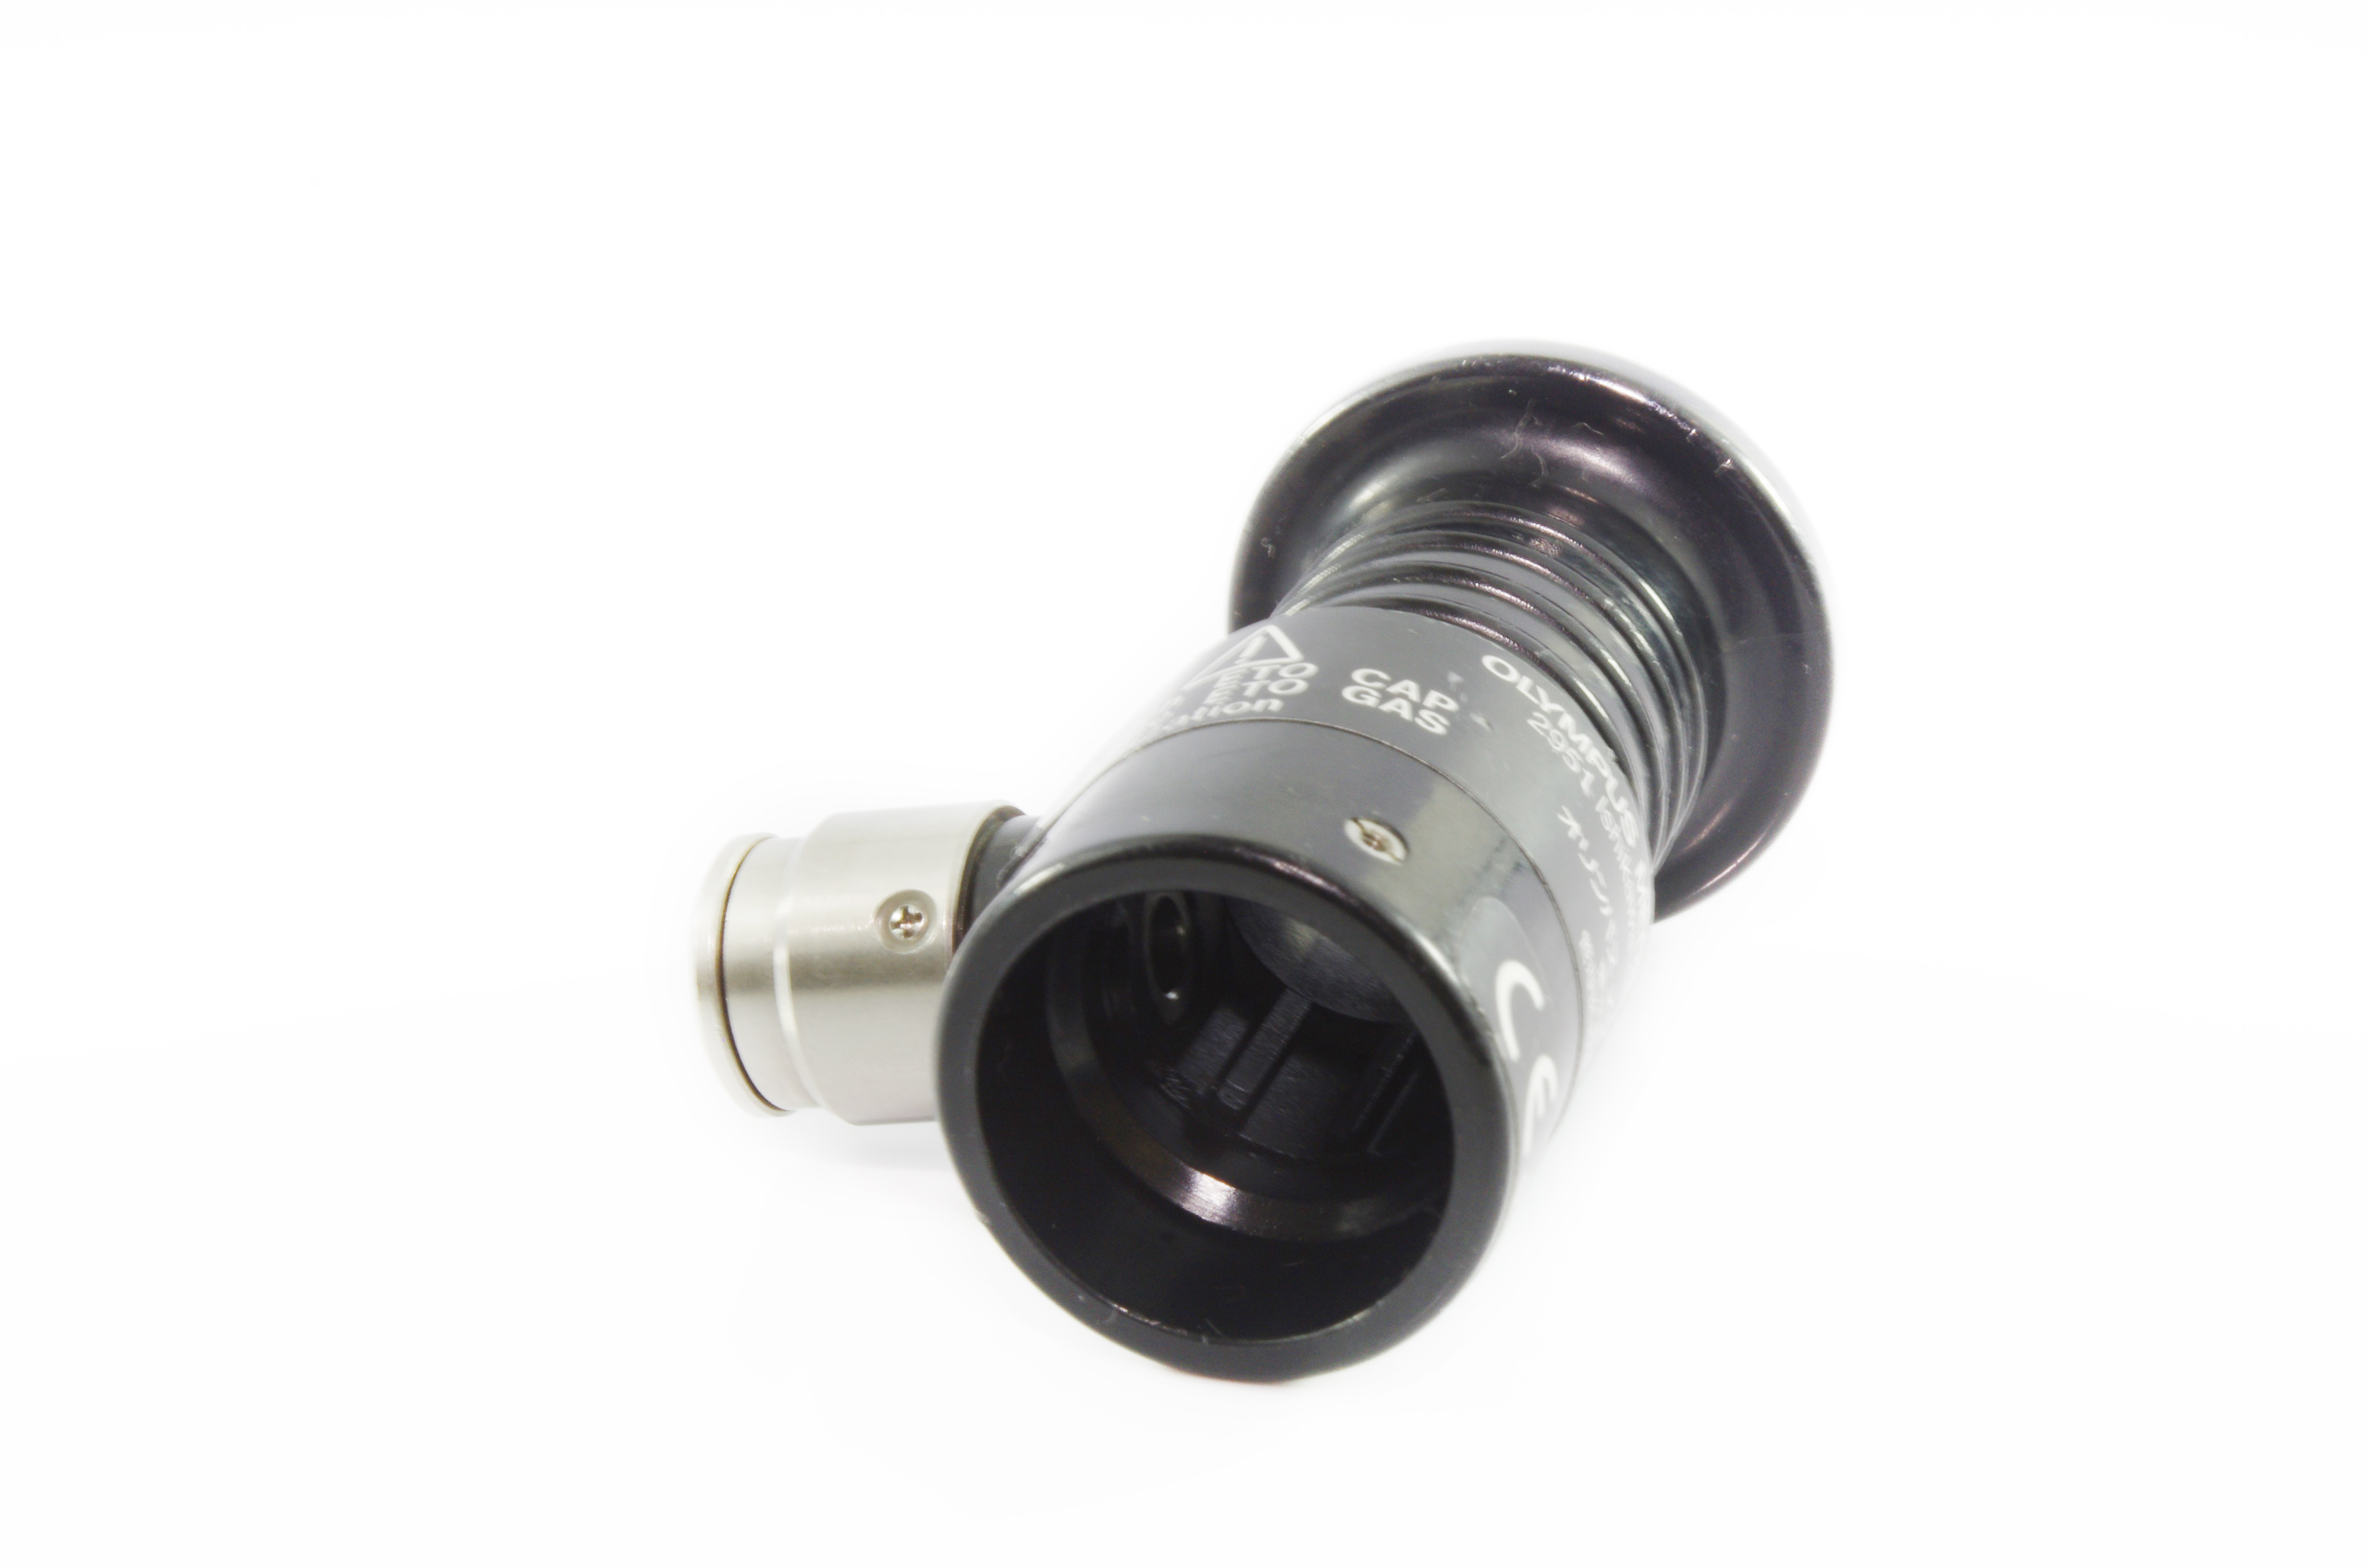 OEM ETO Connector Housing - CYF-4, URF-P3, ENF-P3, ENF-P4, LF-2 (Style 2 - Ridges Out) (ETO Valve Attached)